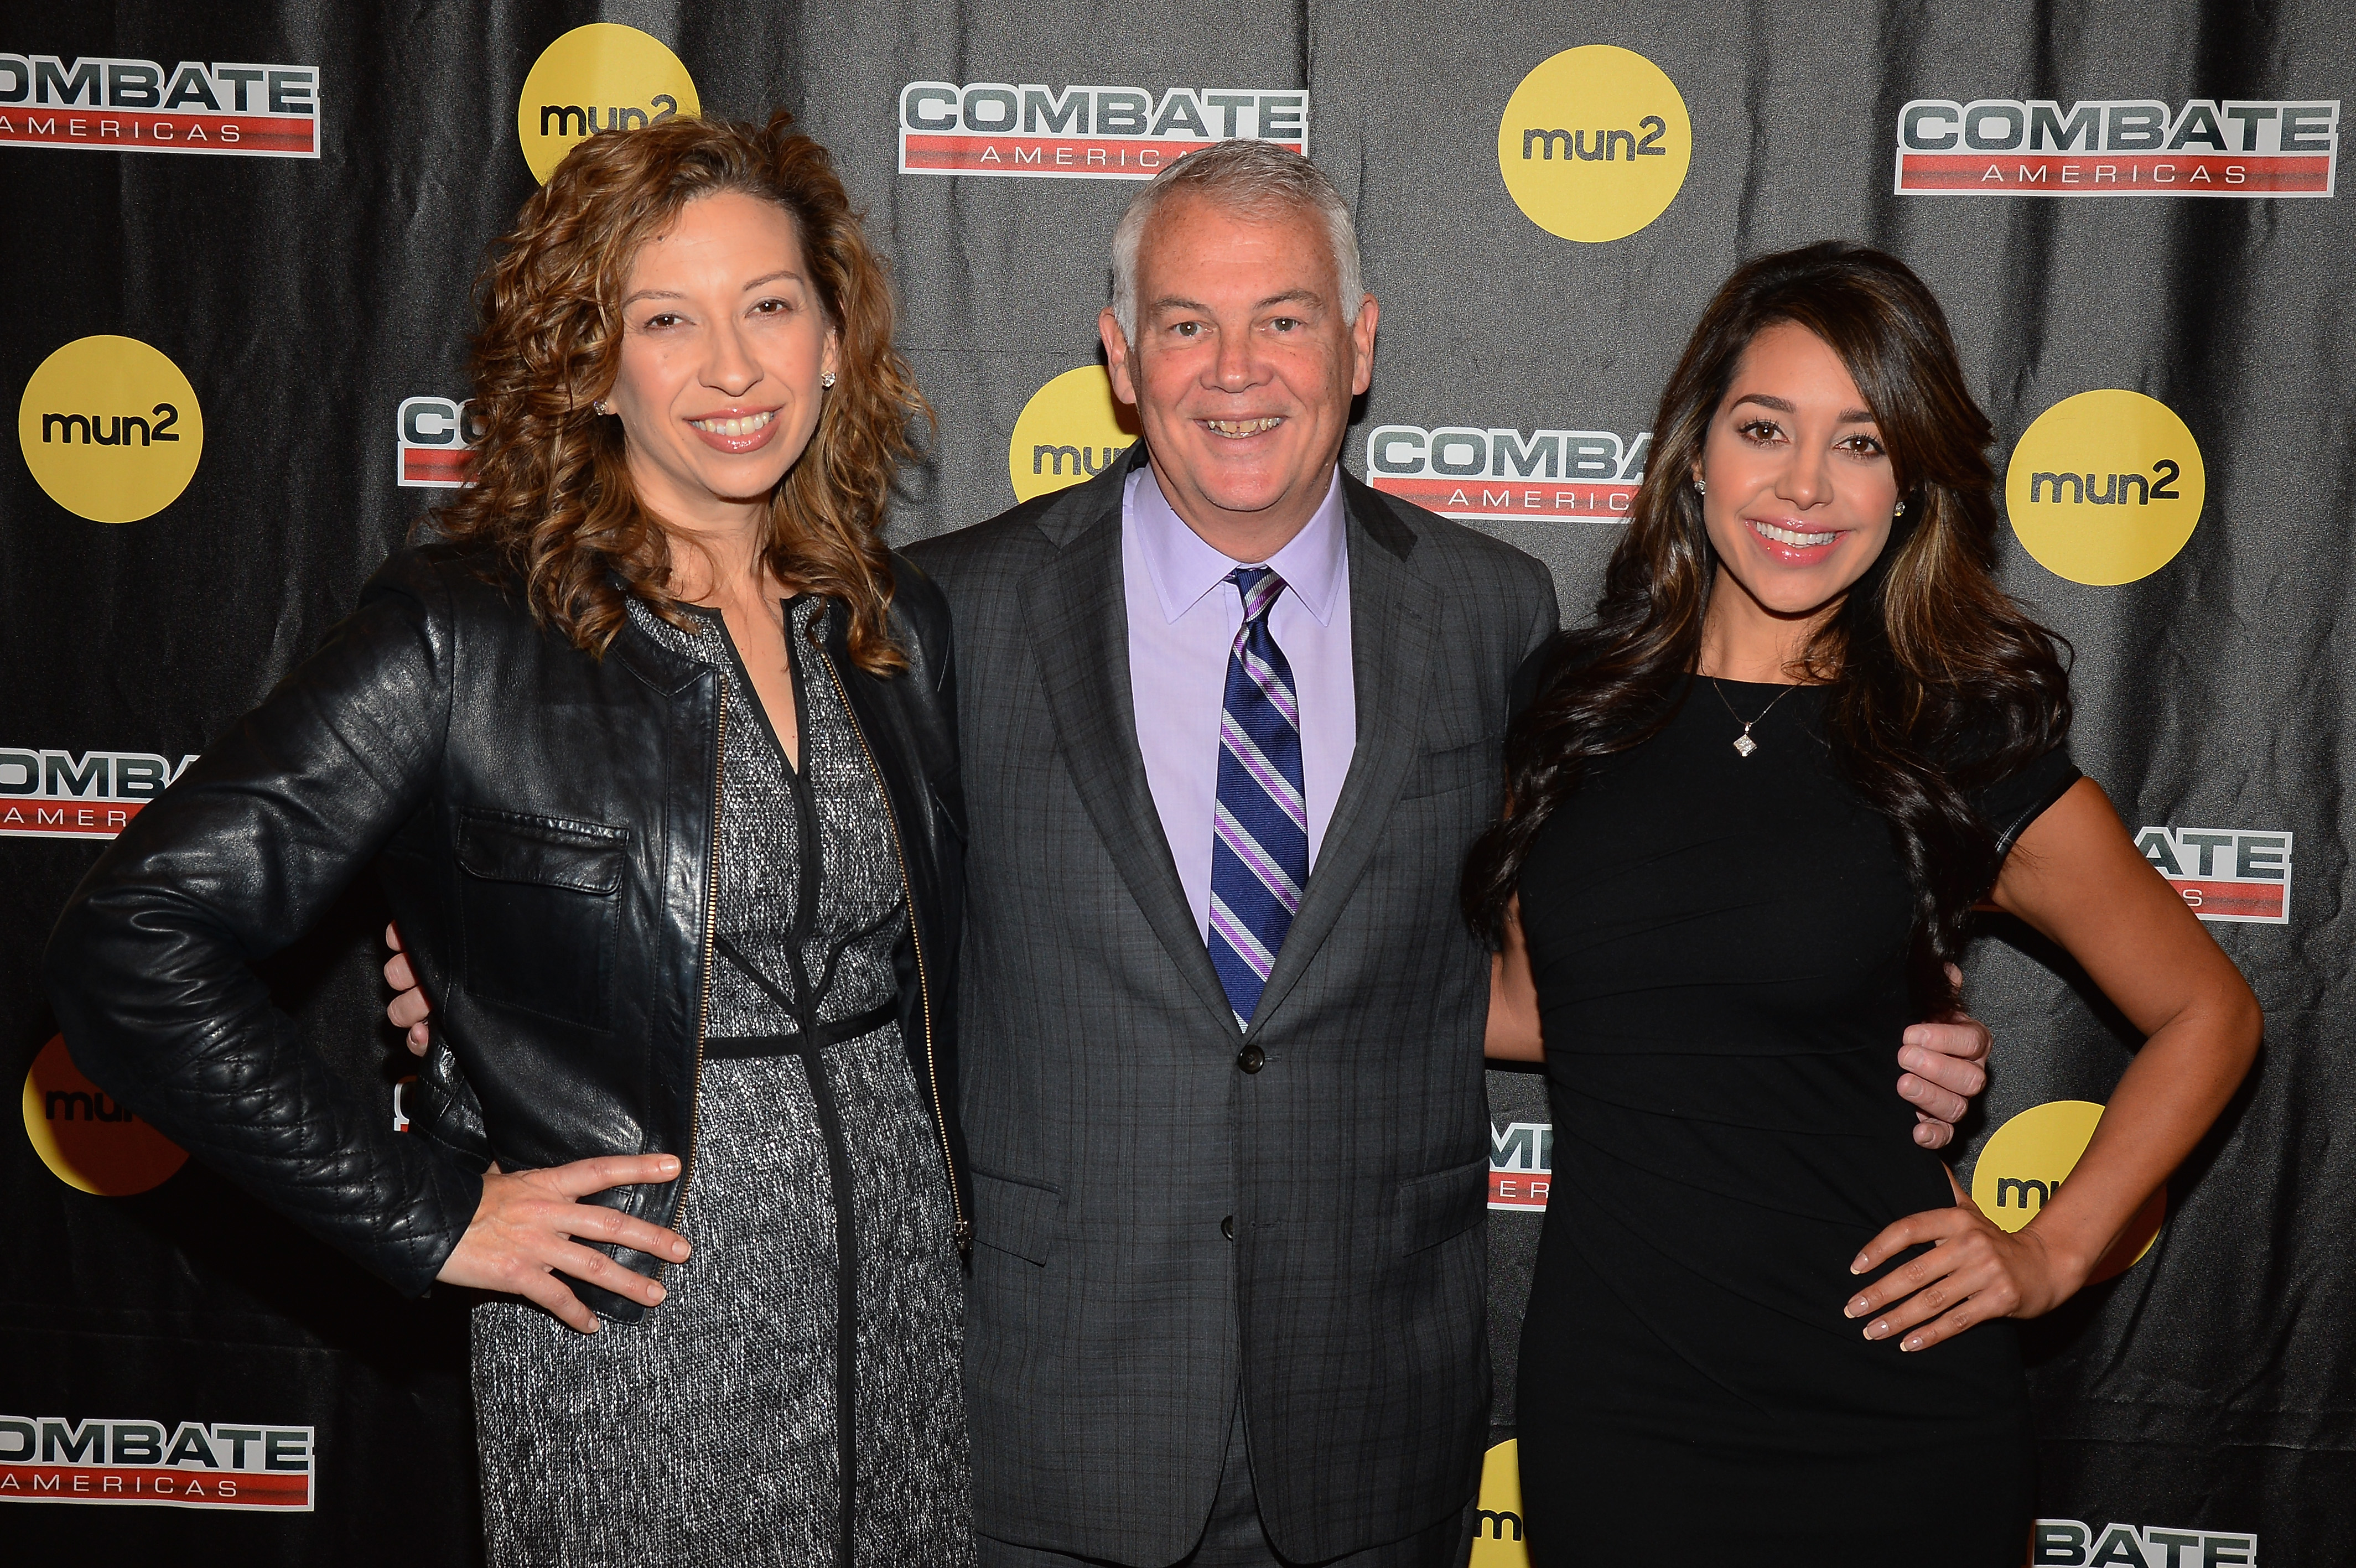 mun2 And Campbell McLaren Host Media Luncheon Introducing New MMA Reality Series “Combate Americas”